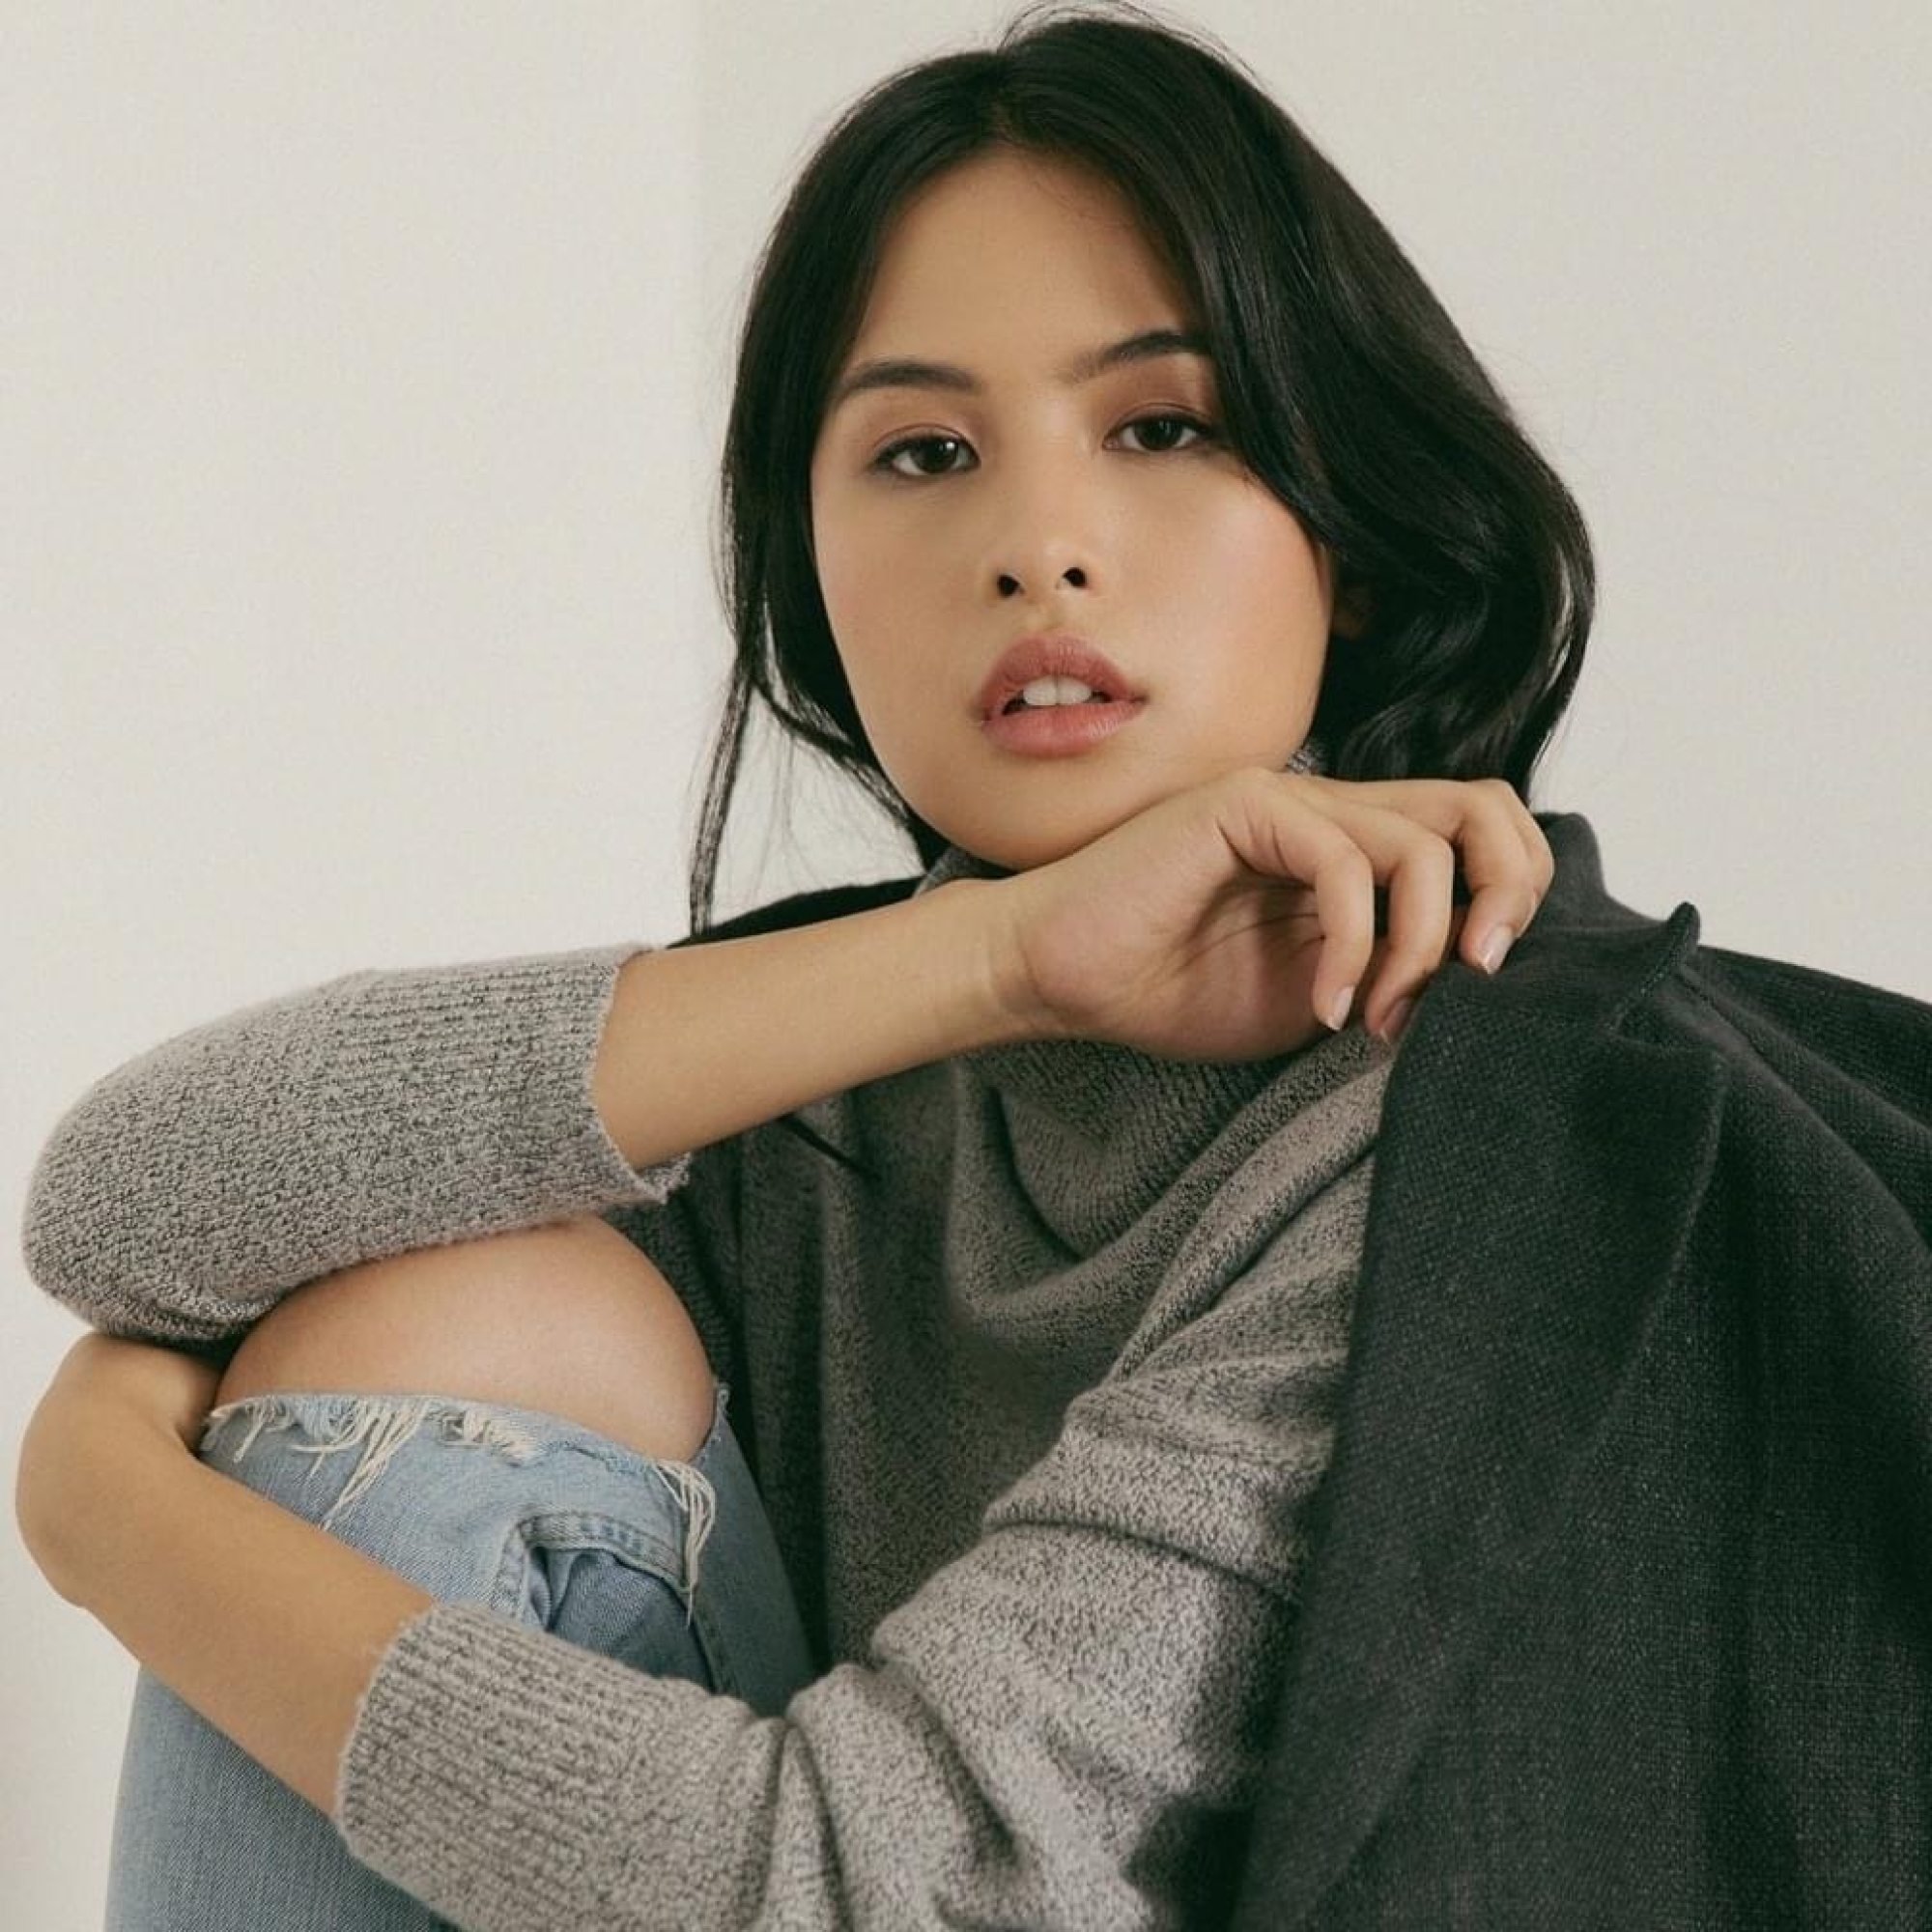 Photo of celebrity Maudy Ayunda who was appointed as G20 spokesperson. Her appointment is being criticised as a way for Indonesia’s president to woo the youth population. Photo: Facebook